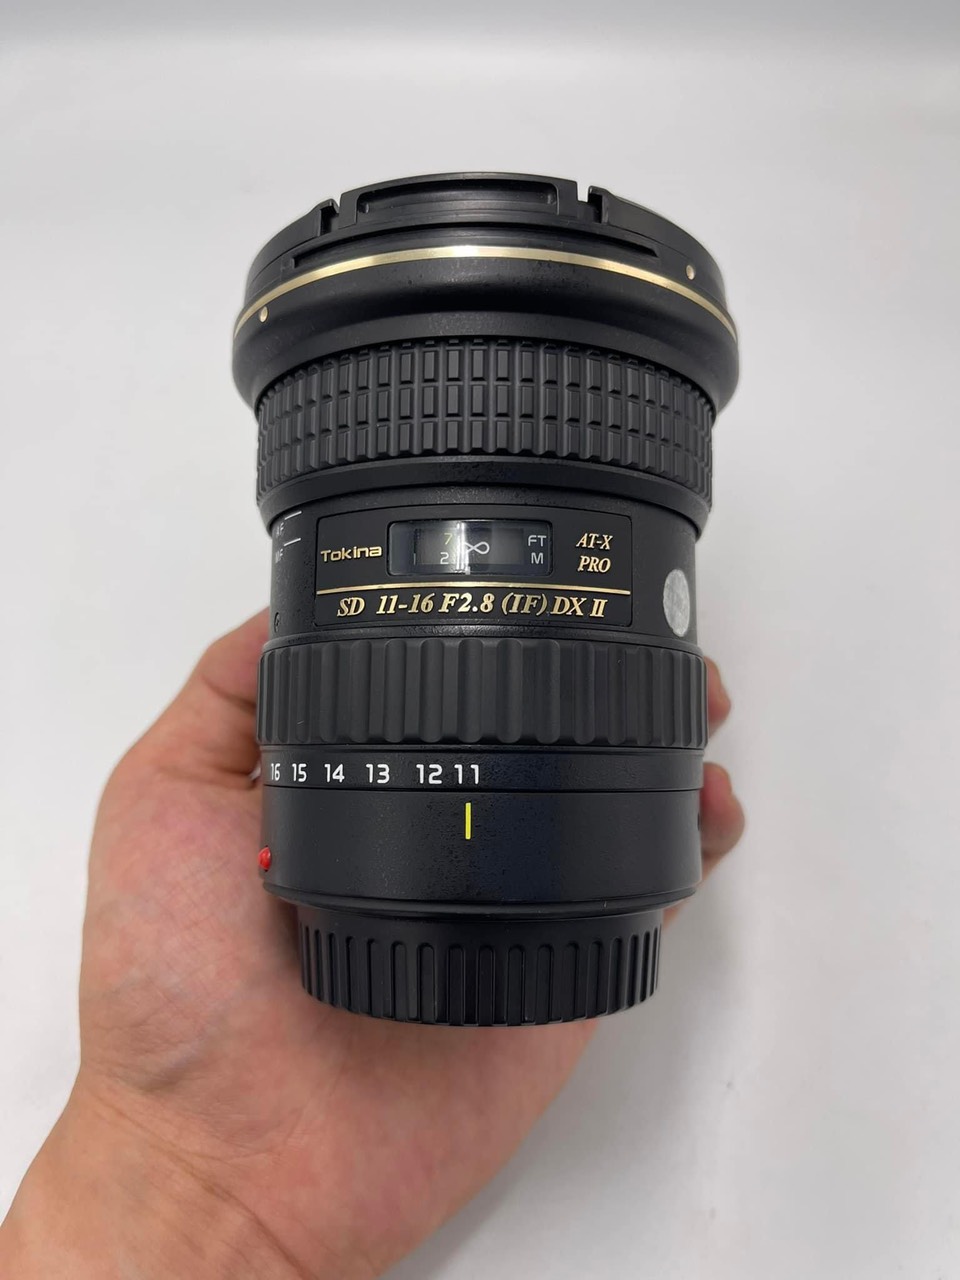 Tokina SD 11-16mm F2.8 DX II Pro for Canon (Đồ cũ)